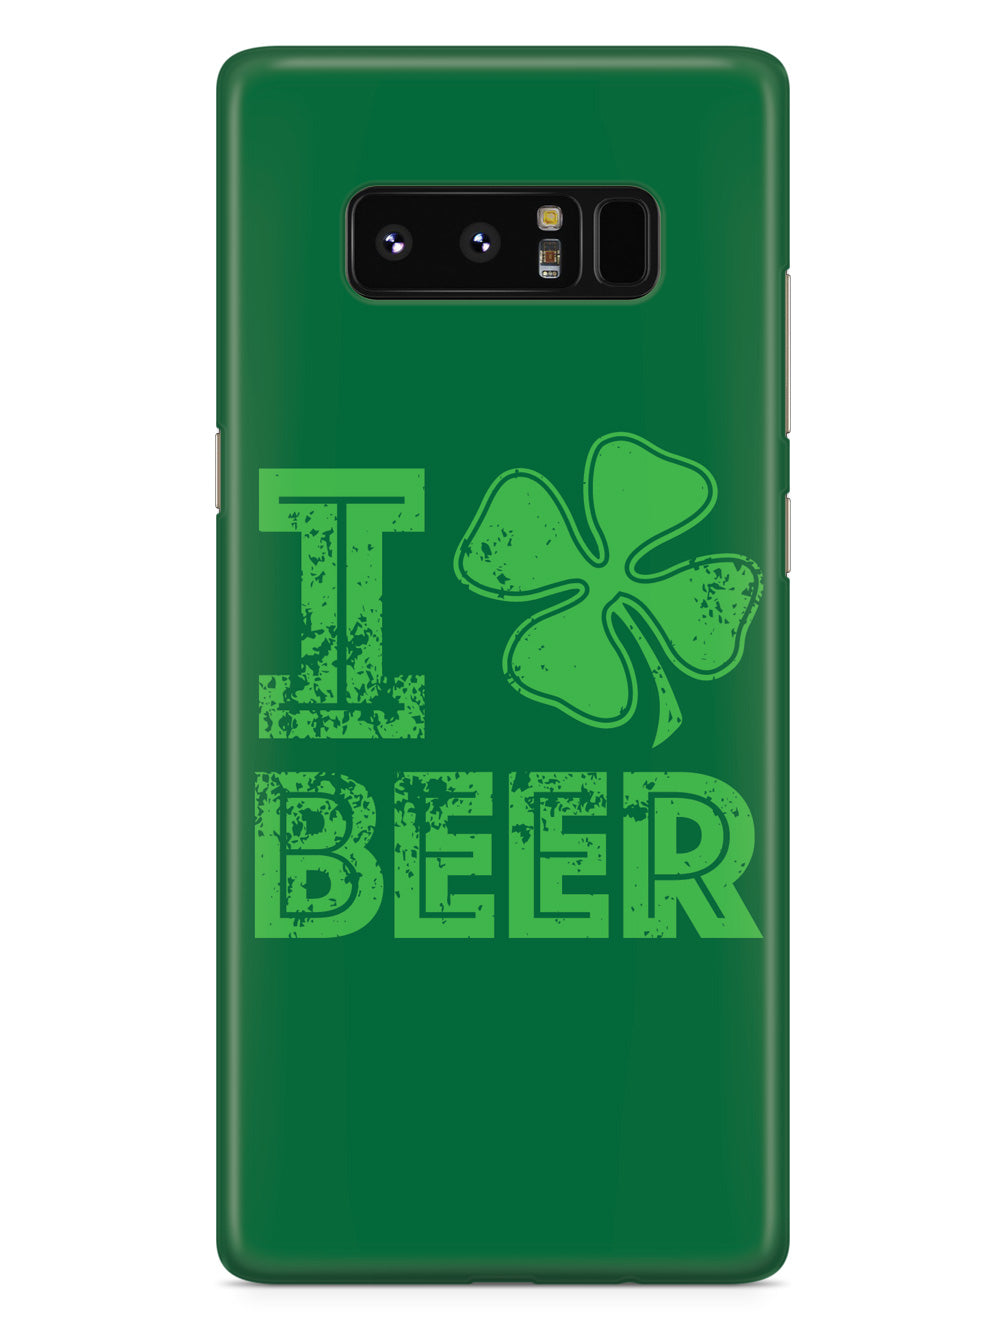 I Love Beer - St. Patrick's Day Four Leaf Clover Lucky Case